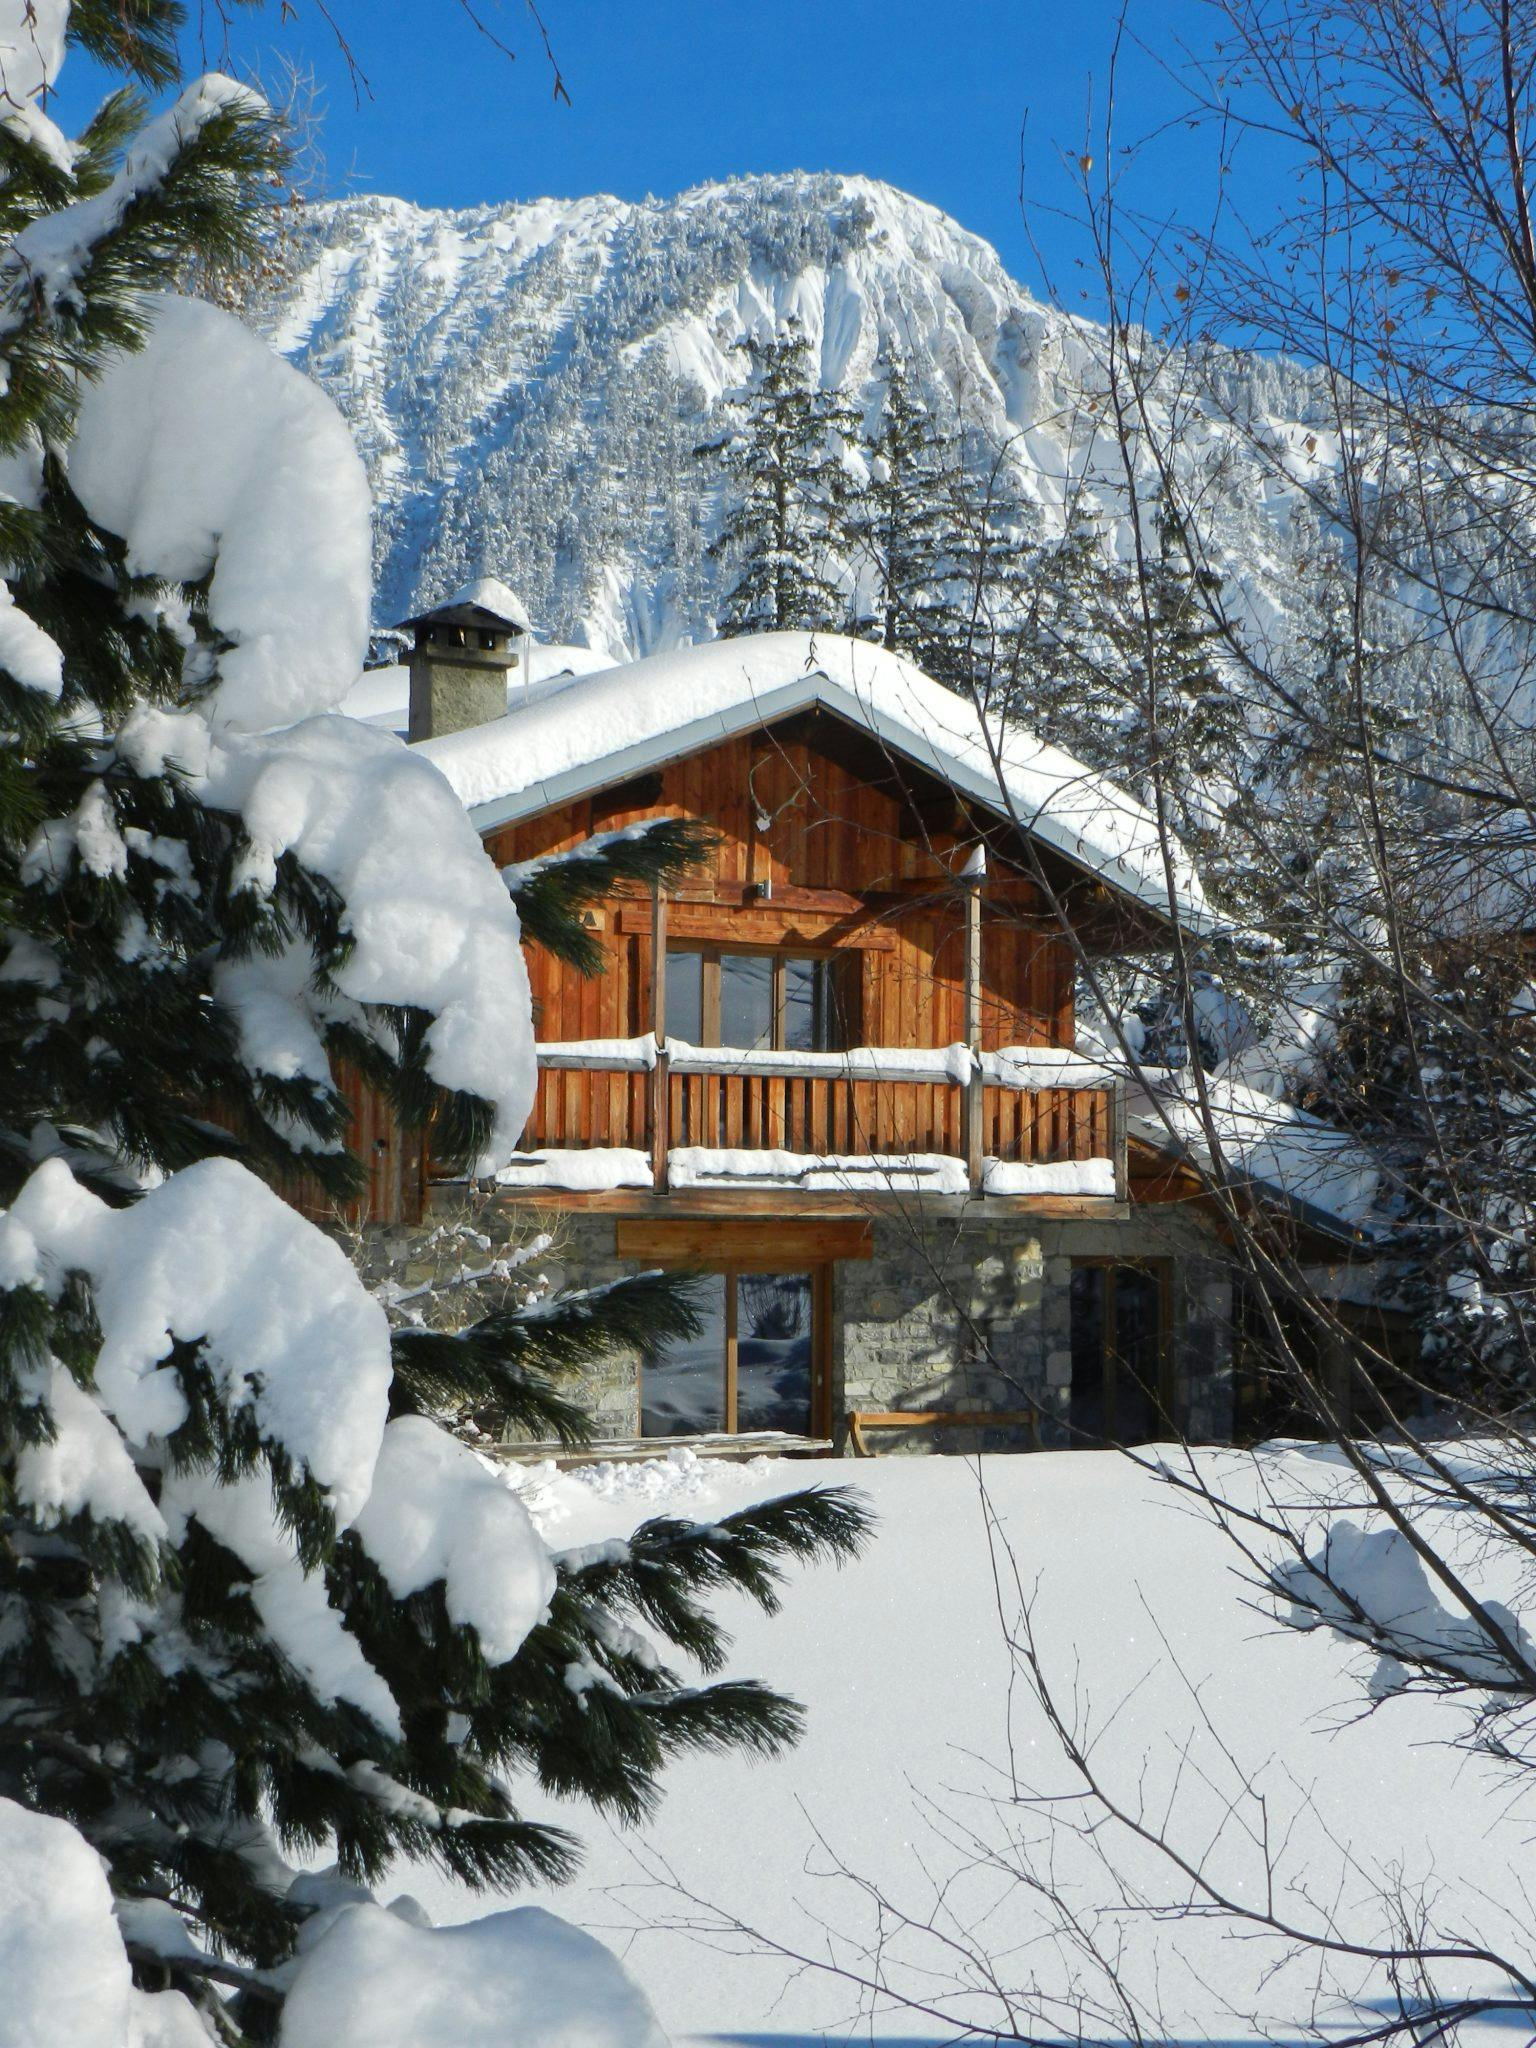 View of the snow-covered chalet